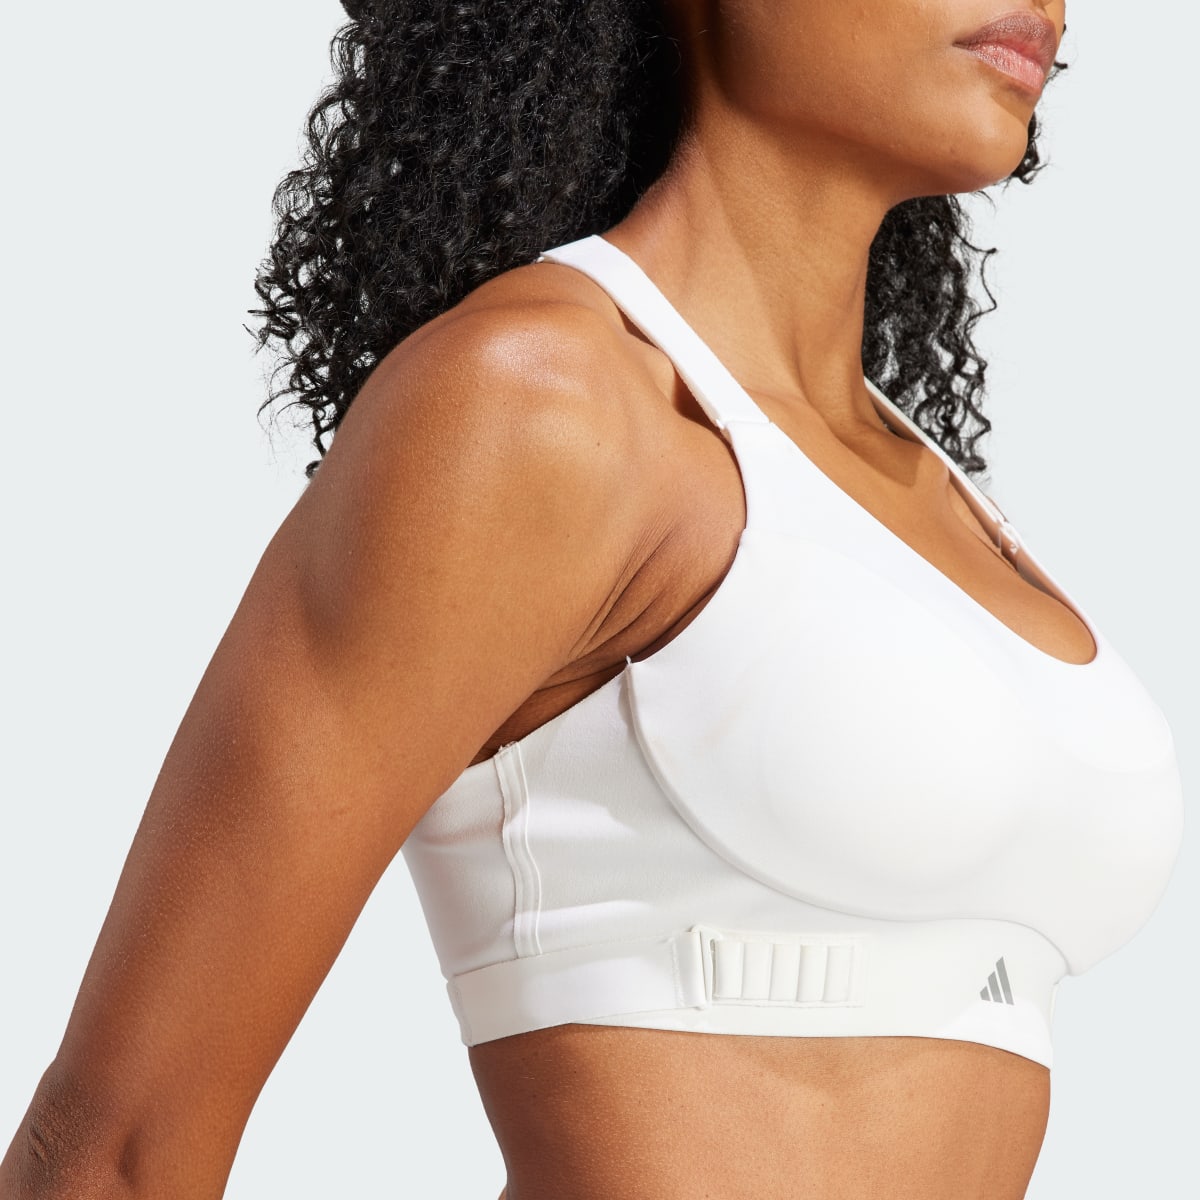 Adidas Collective Power Fastimpact Luxe High-Support Bra. 7